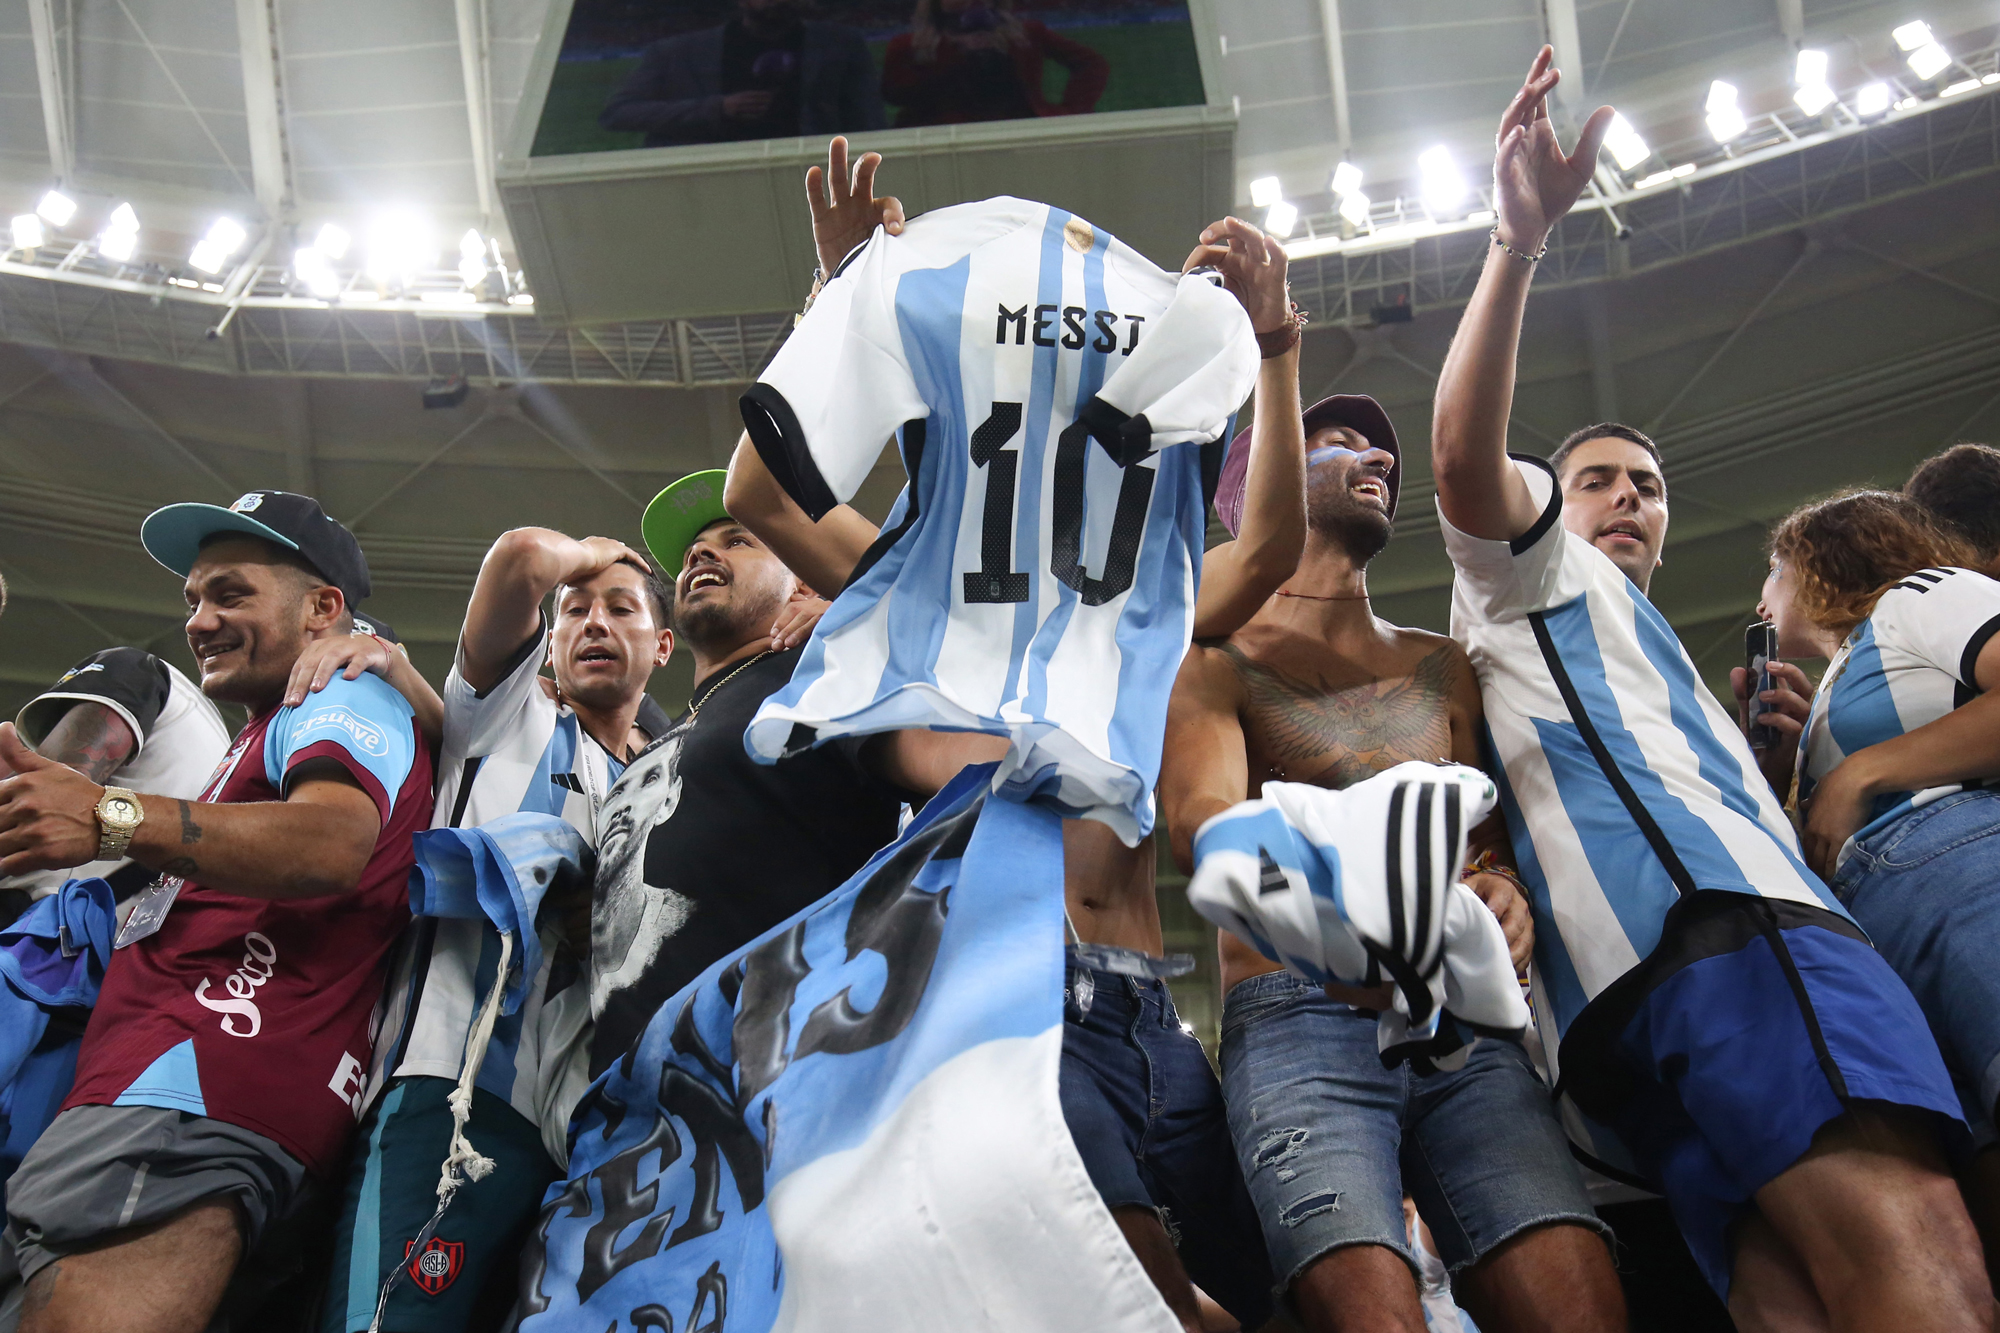 Argentine fans wearing Lionel Messi jerseys during their match against Australia at the Ahmed Ben Ali Stadium in Qatar on Saturday.